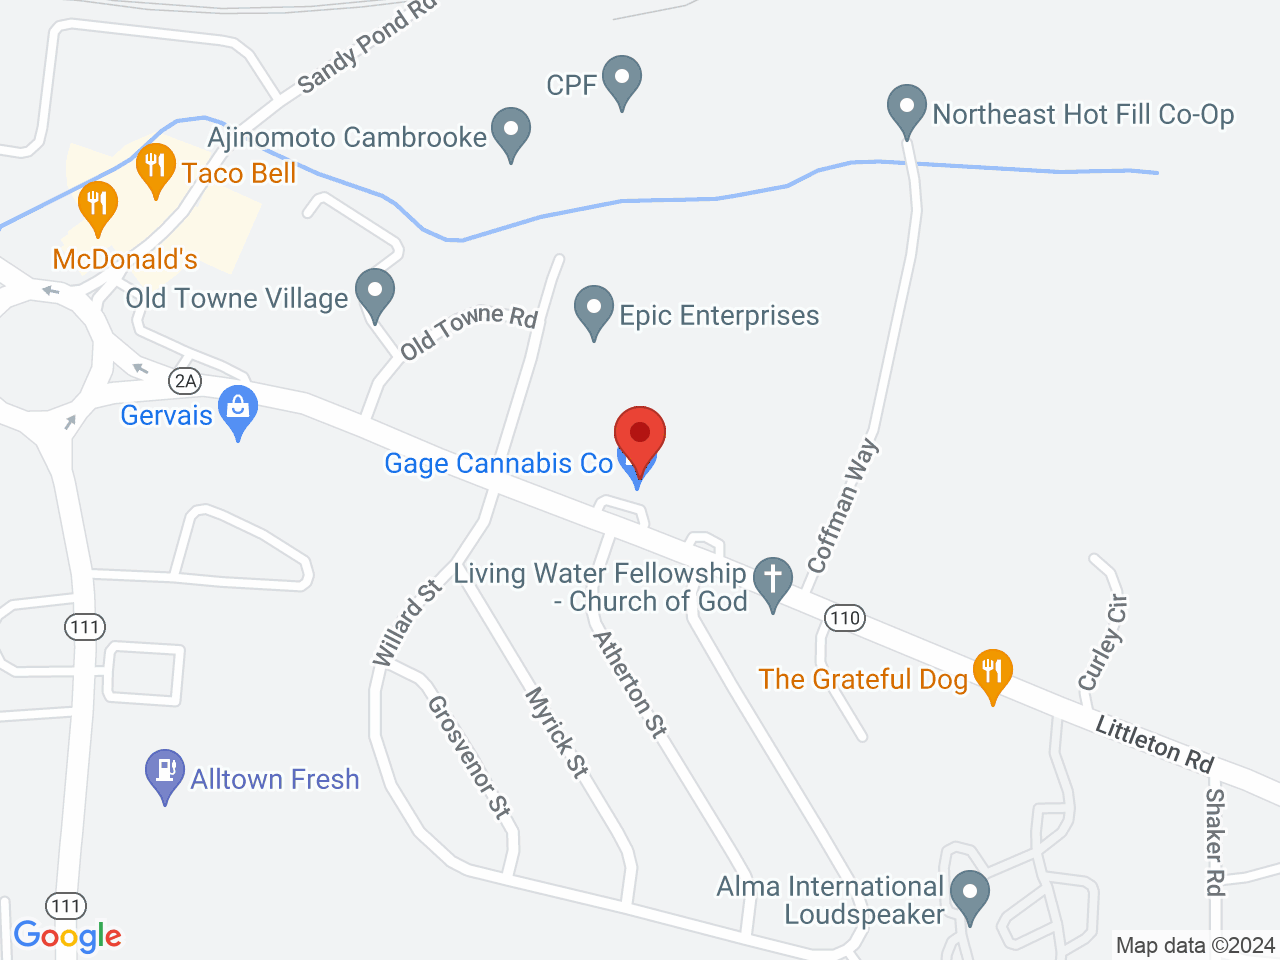 Street map for Gage Cannabis, 38 Littleton Rd., Ayer MA